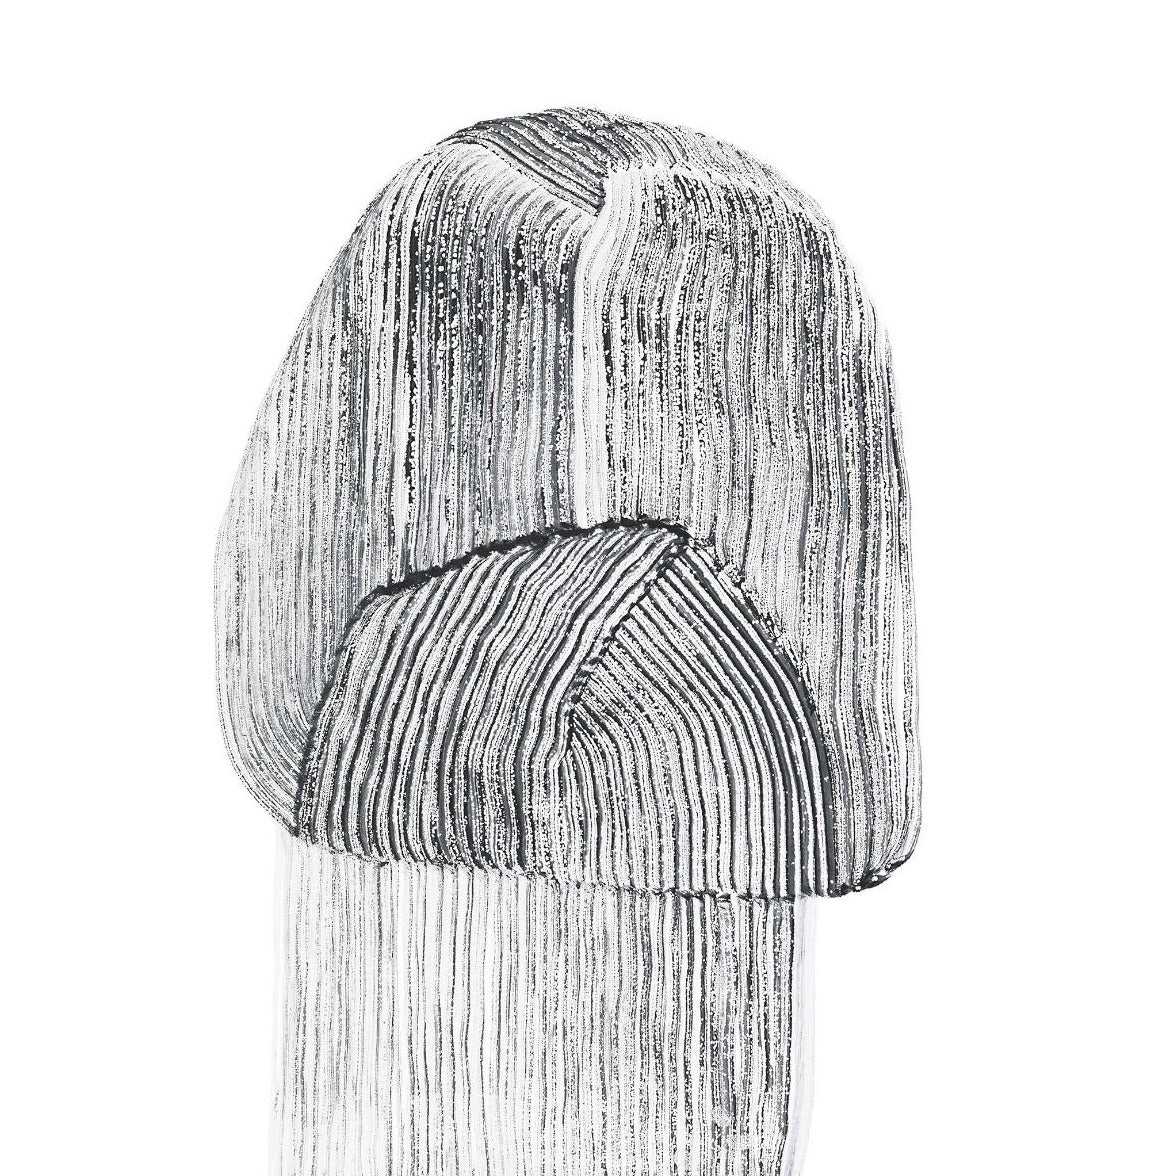 Drawing 9 by Ronan Bouroullec